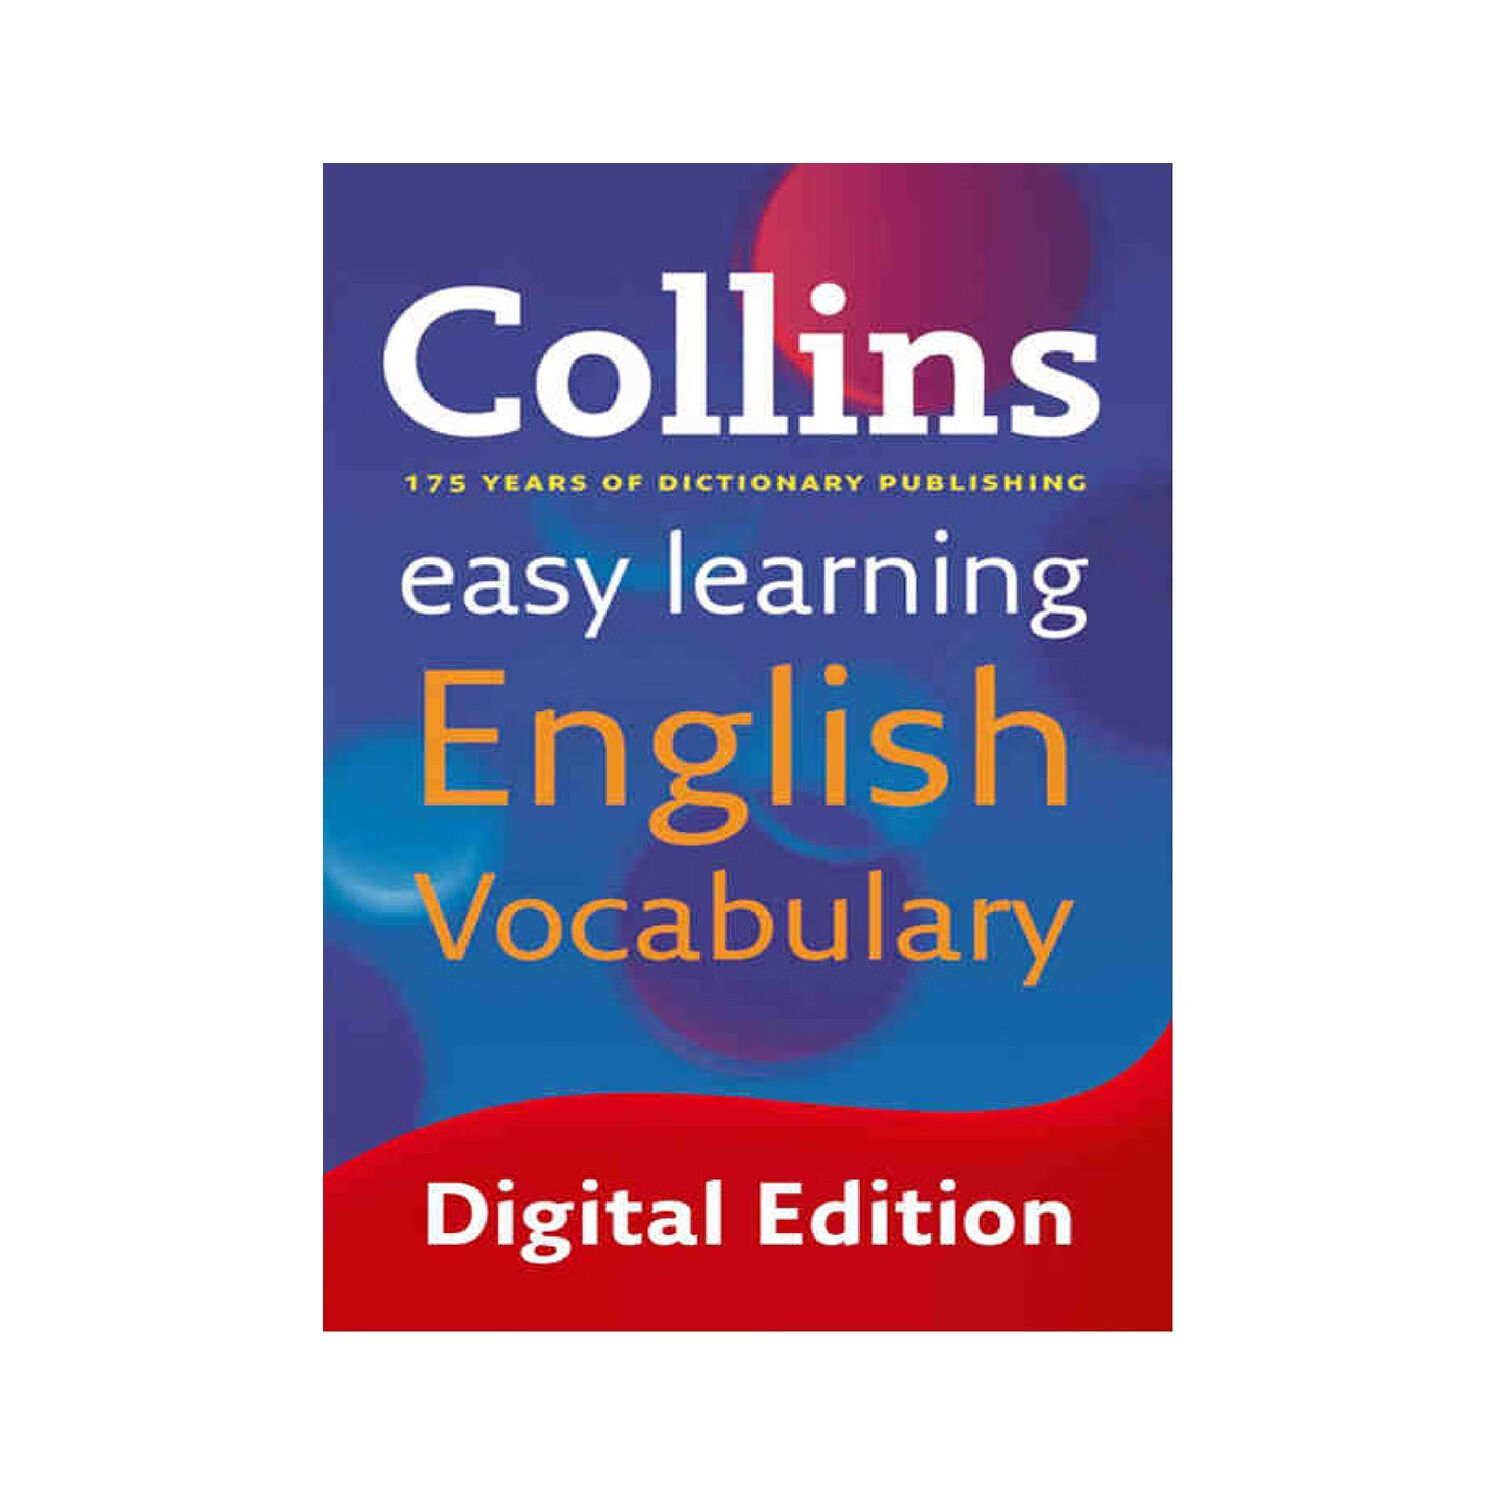 Collins easy learning english vocabulary